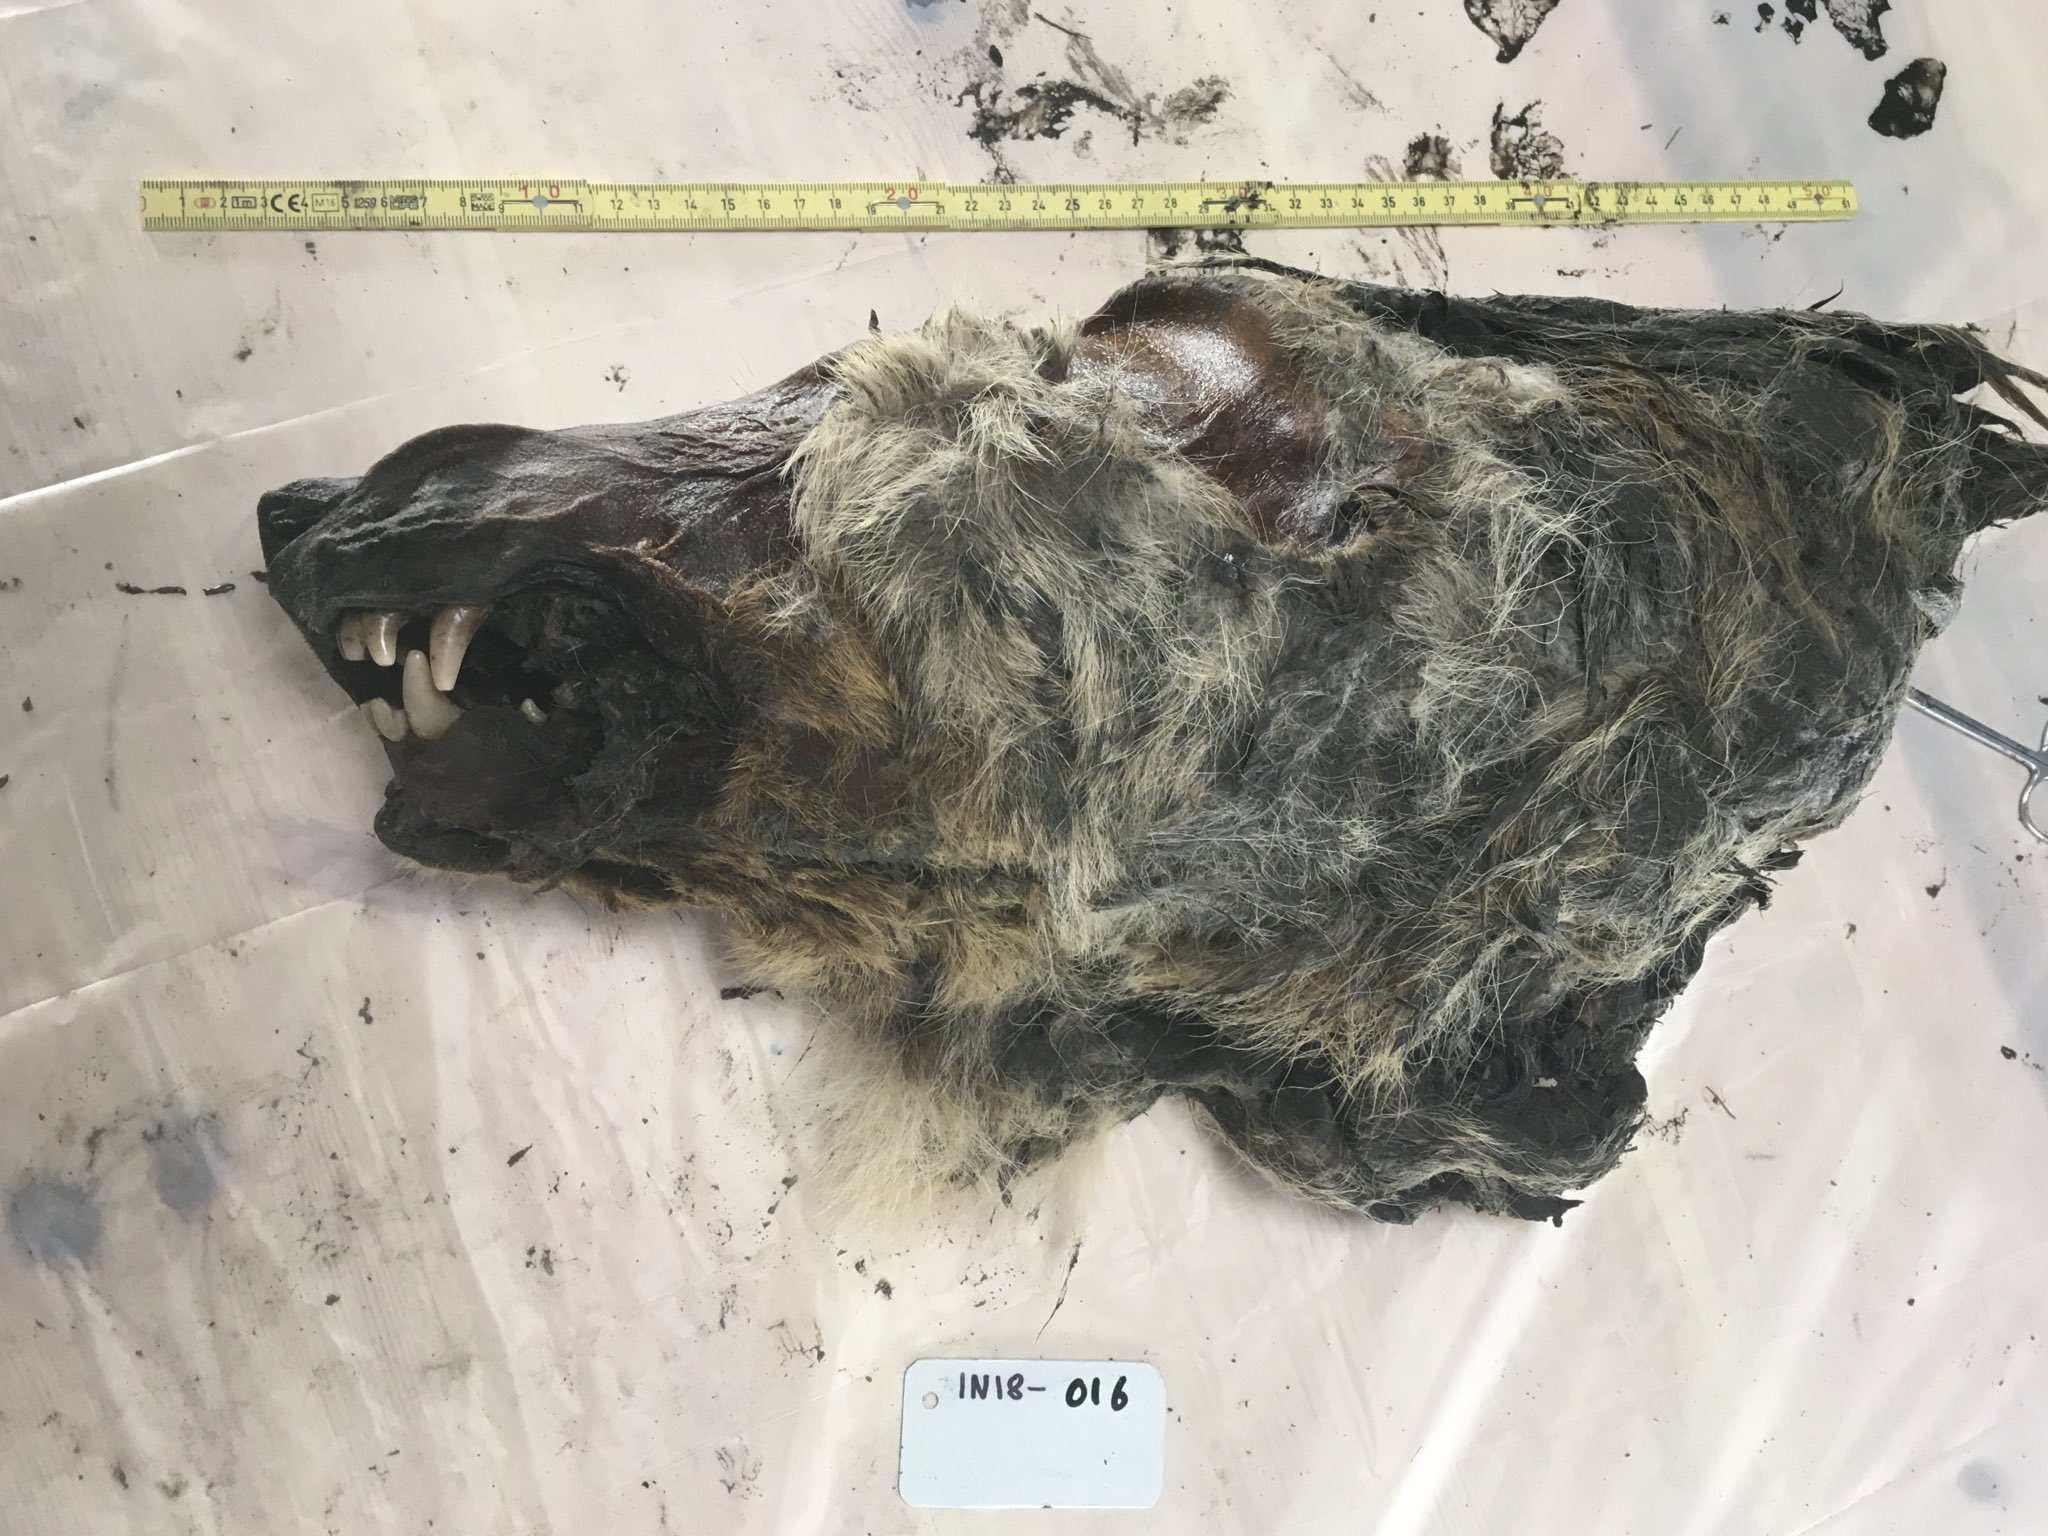 A perfectly preserved 32,000-year-old wolf head was found in Siberian permafrost 11